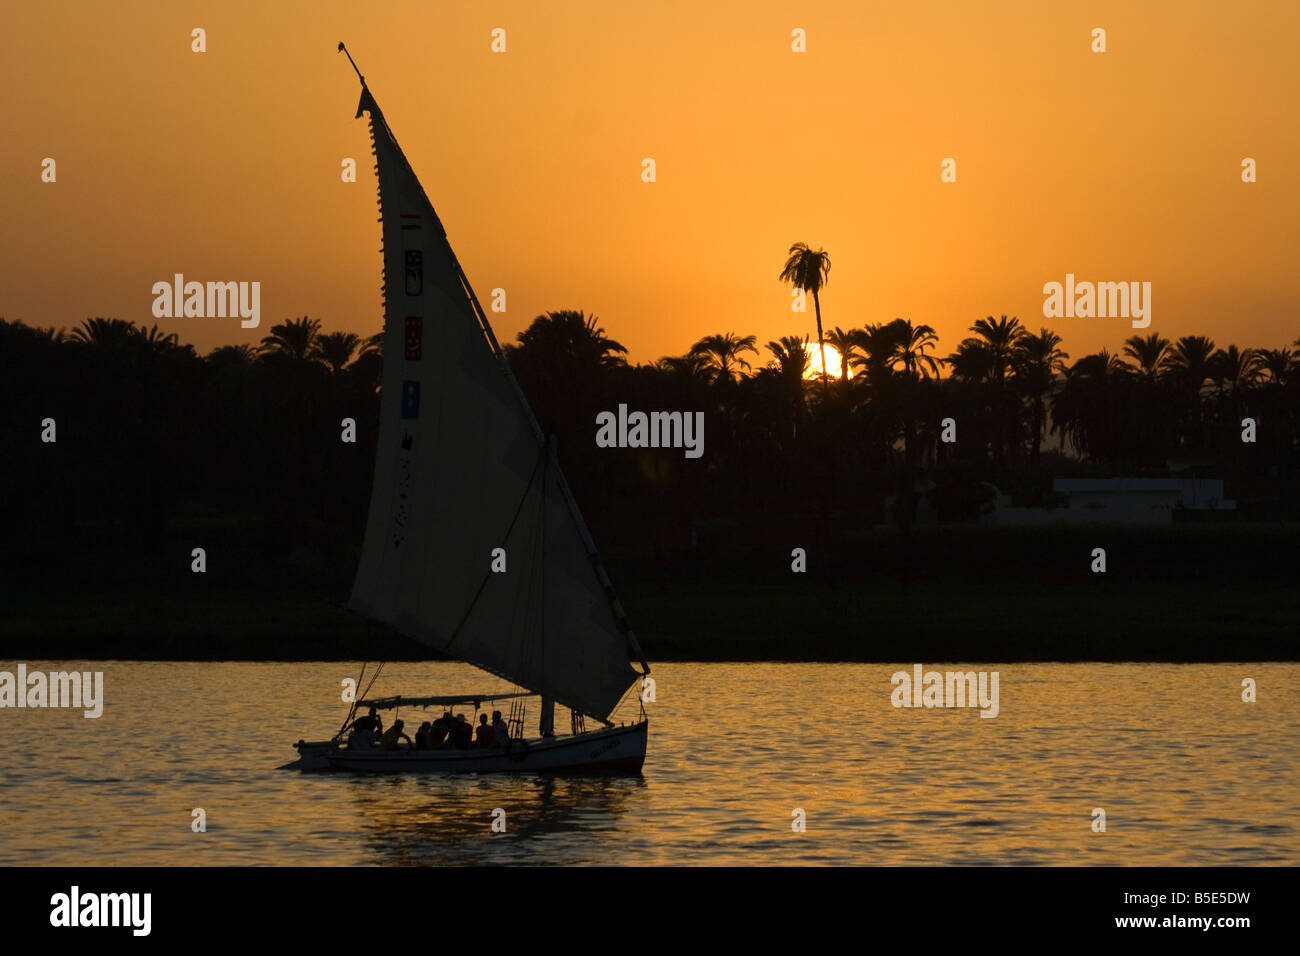 Felucca Sailboat at Sunset on the Nile River in Luxor Egypt Stock Photo